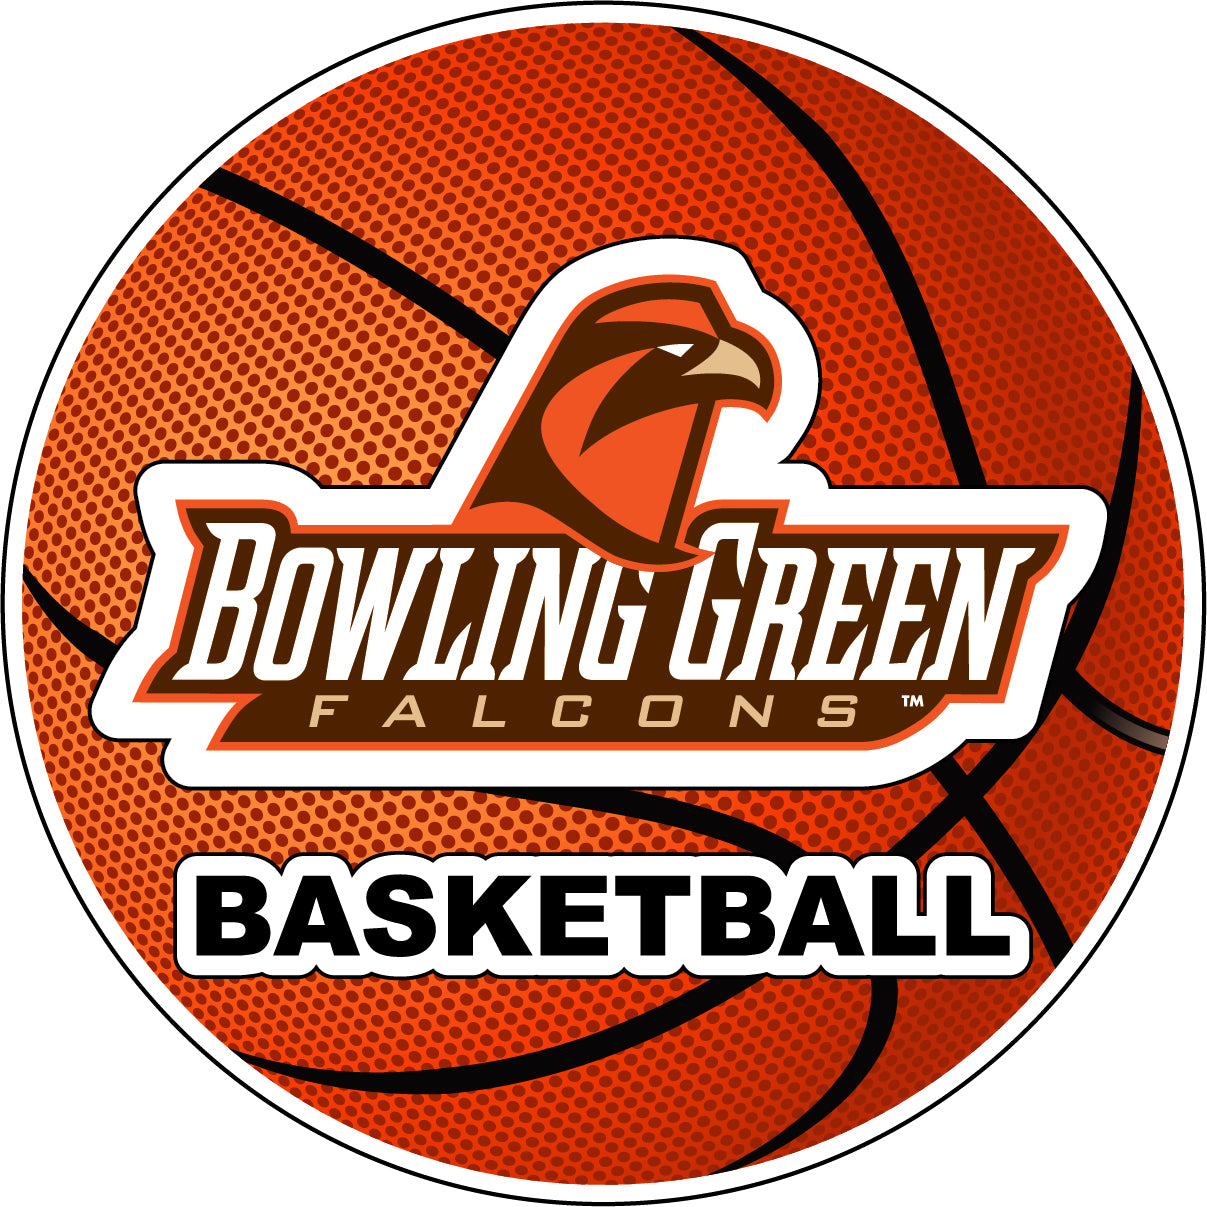 Bowling Green Falcons 4-Inch Round Basketball Vinyl Decal Sticker